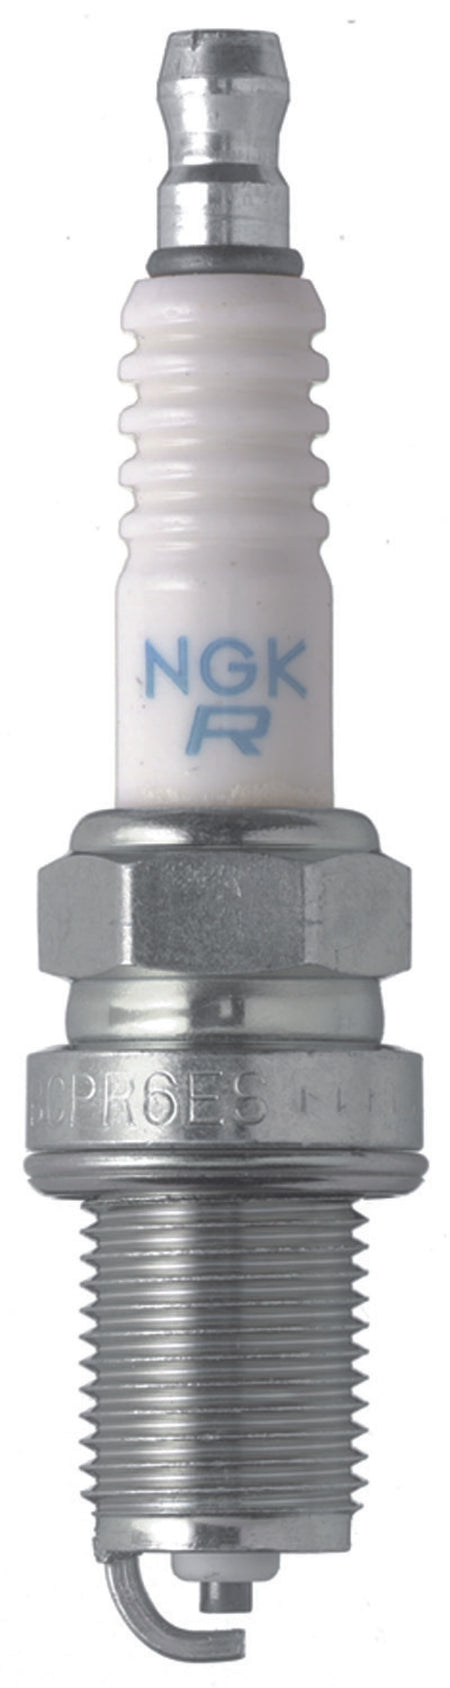 NGK Traditional Spark Plugs Box of 4 (BCPR6ES)